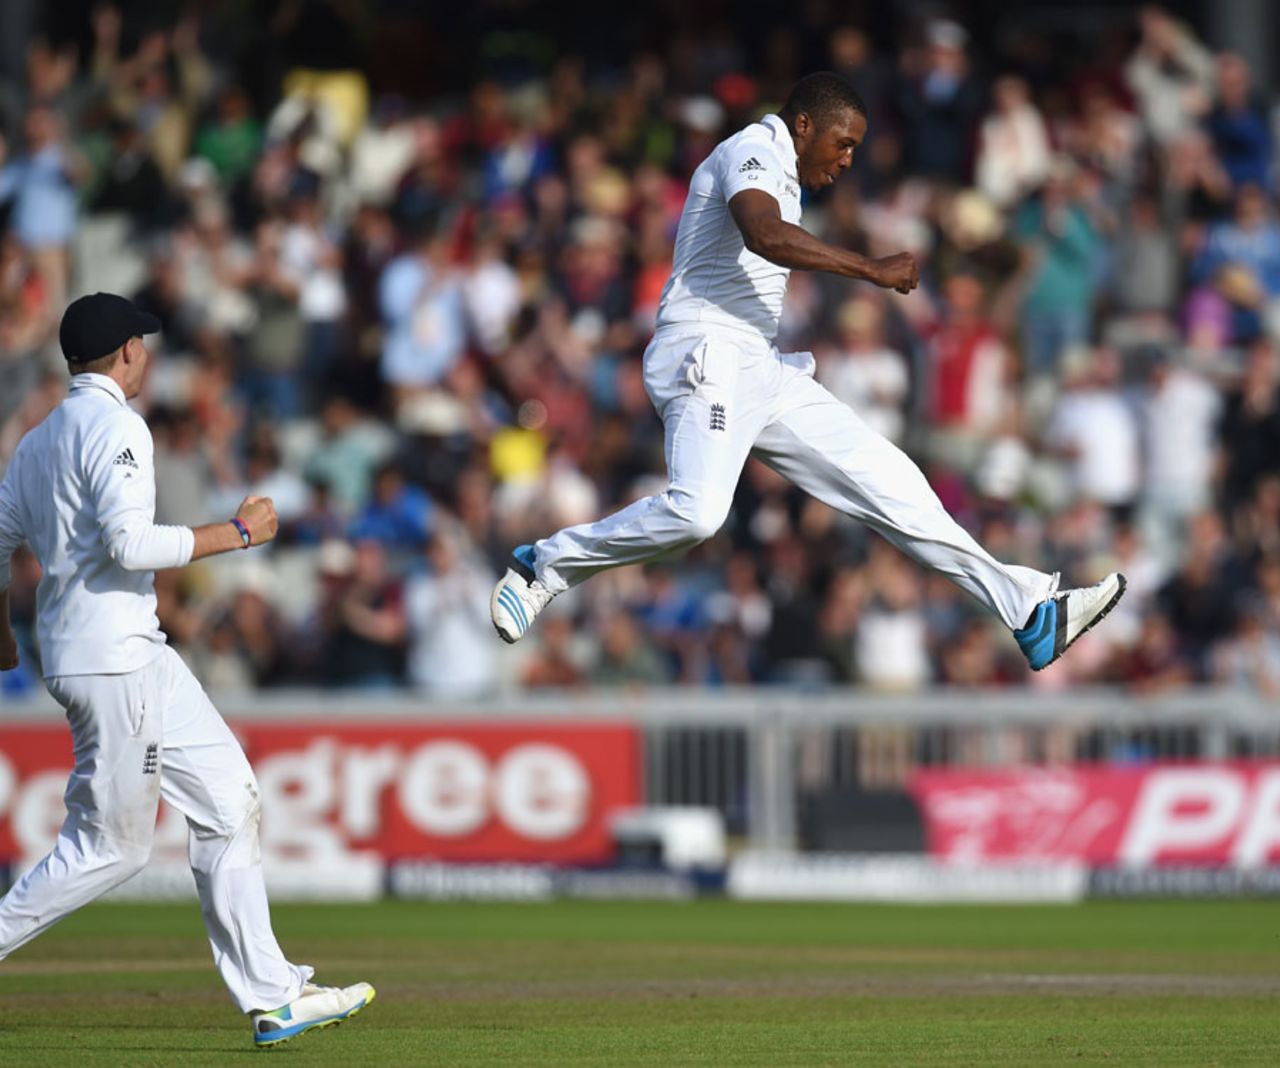 Chris Jordan leaps in the air after taking the final wicket, England v India, 4th Test, Old Trafford, 3rd day, August 9, 2014